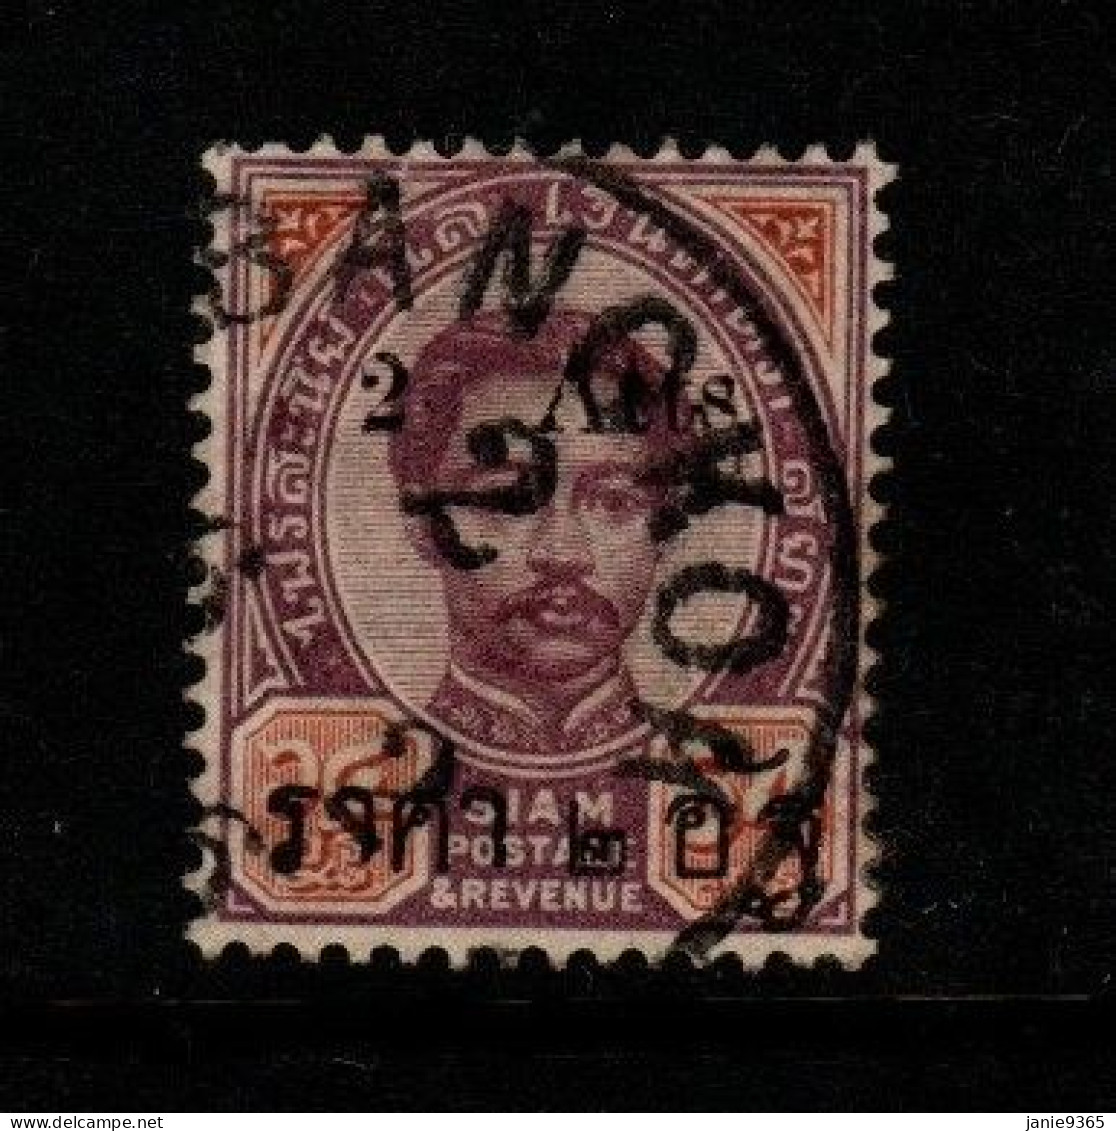 Thailand Cat 68 1899 Surcharged 2 Atts On 64 Atts,used - Thaïlande